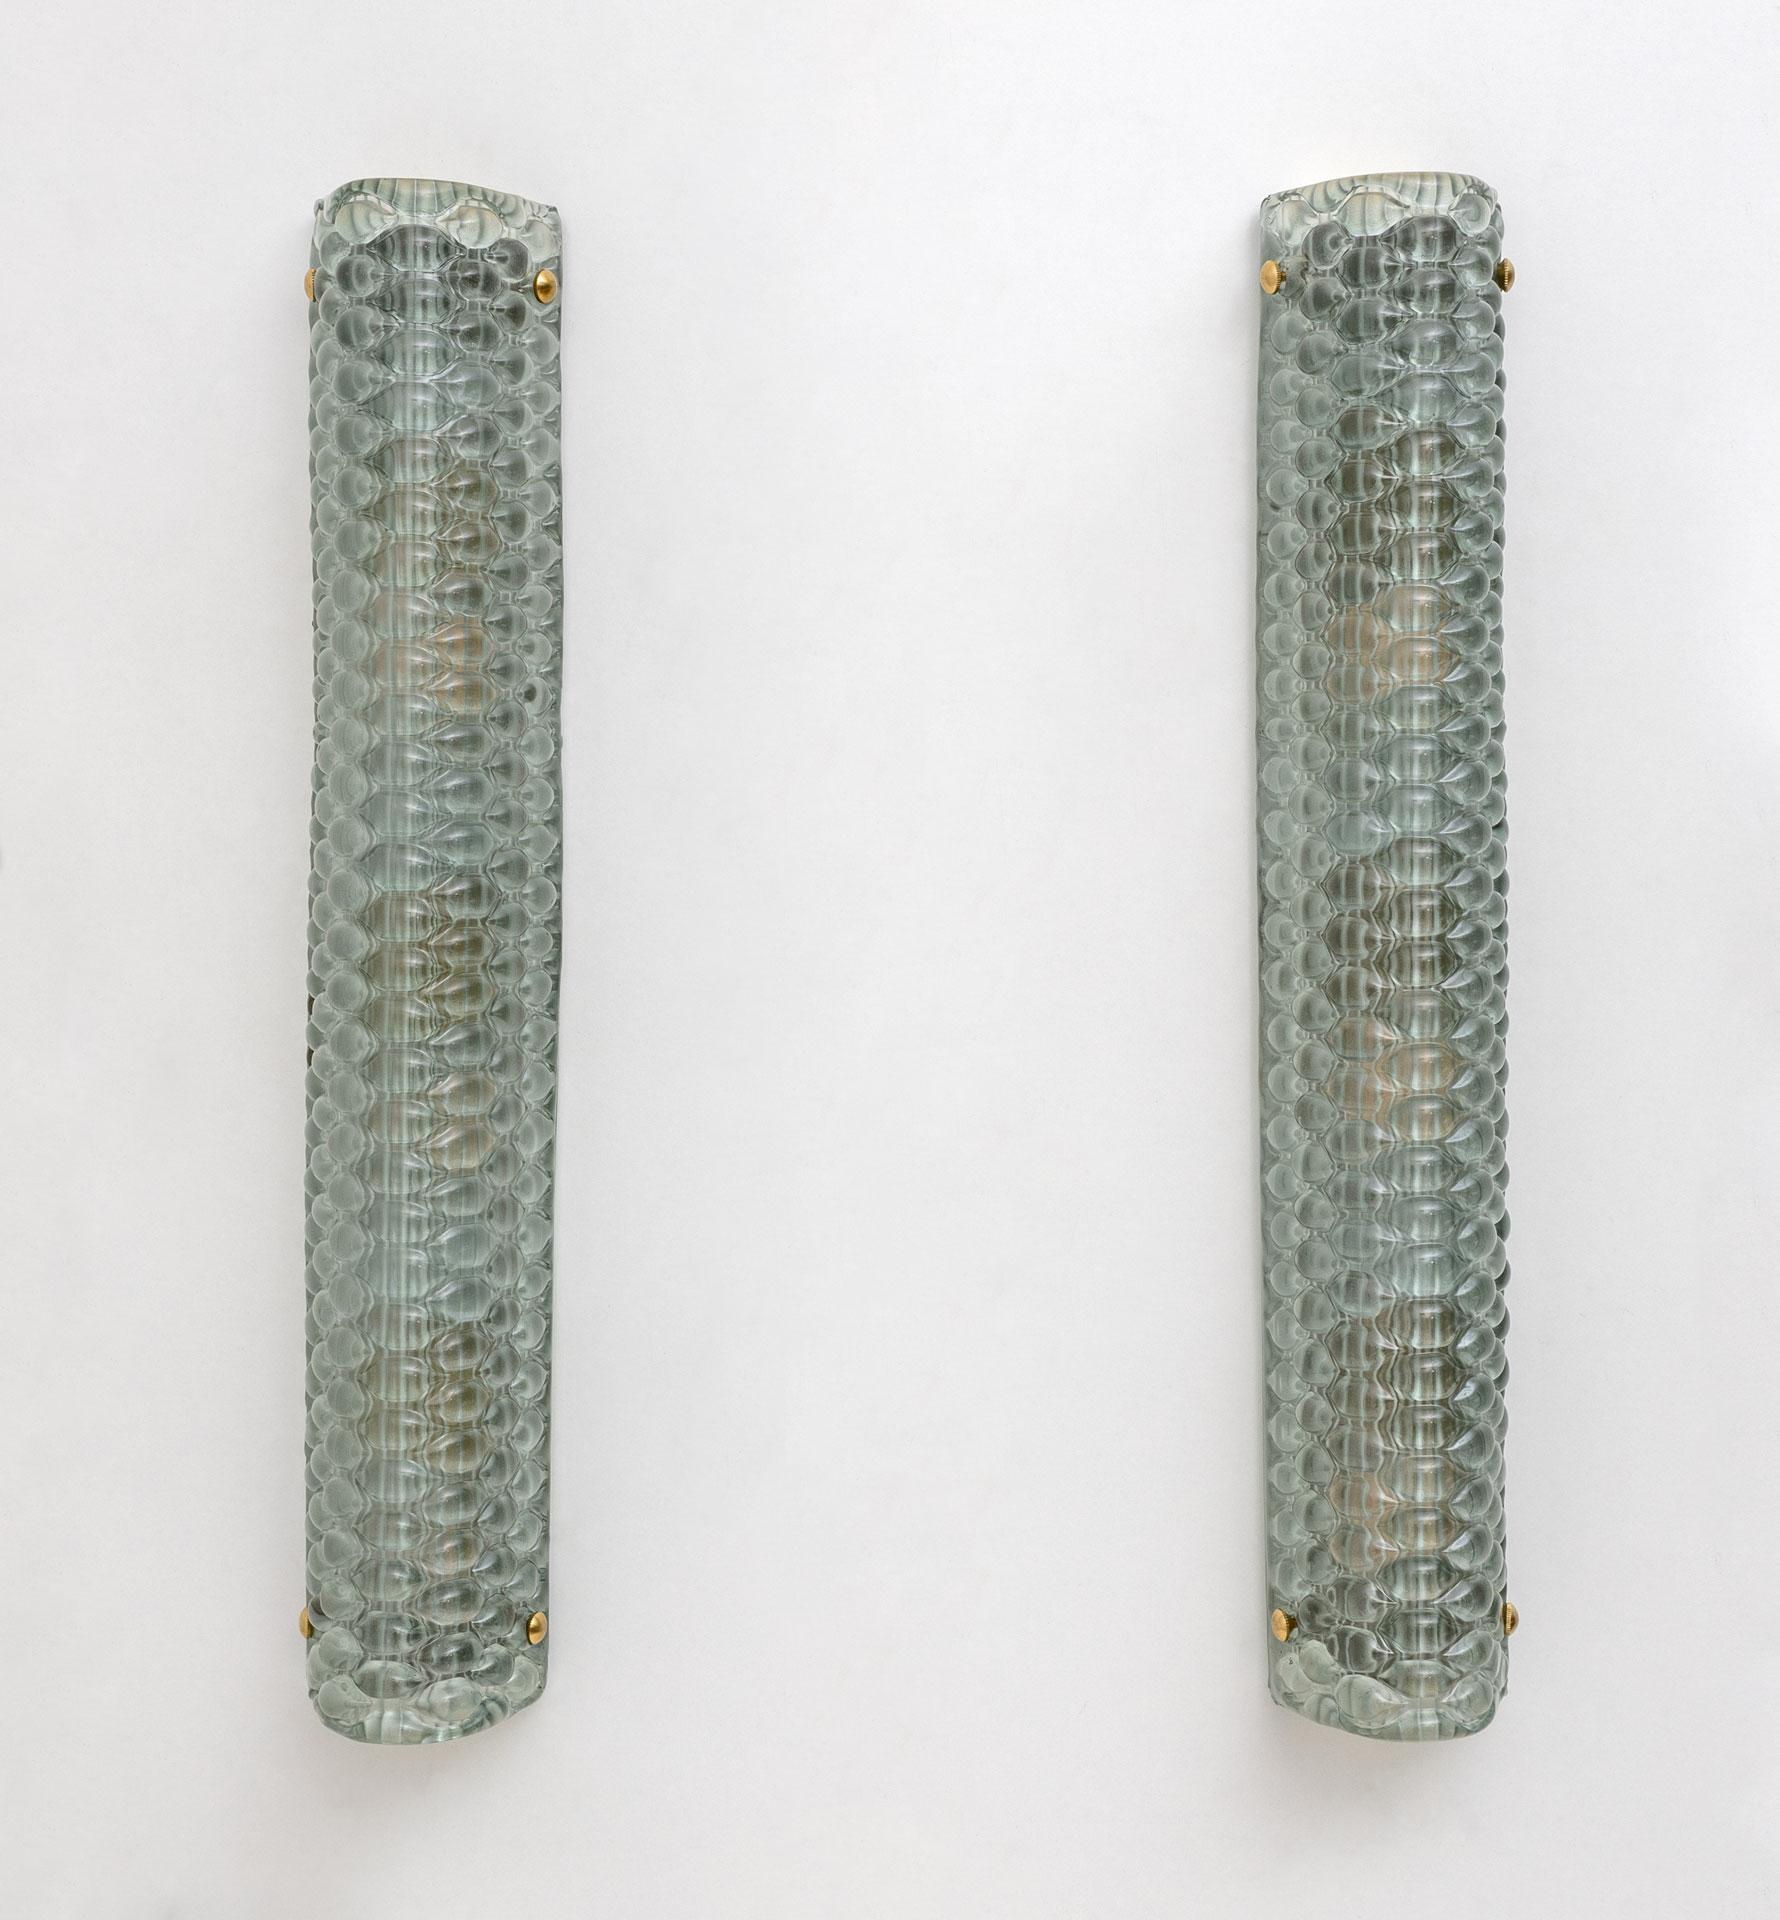 Pair of vintage wall lamps in green structured Murano glass, produced by Murano masters. These are high quality and give off a nice warm glow. Each wall light contains three medium base bulbs and is also wired to meet US standards.